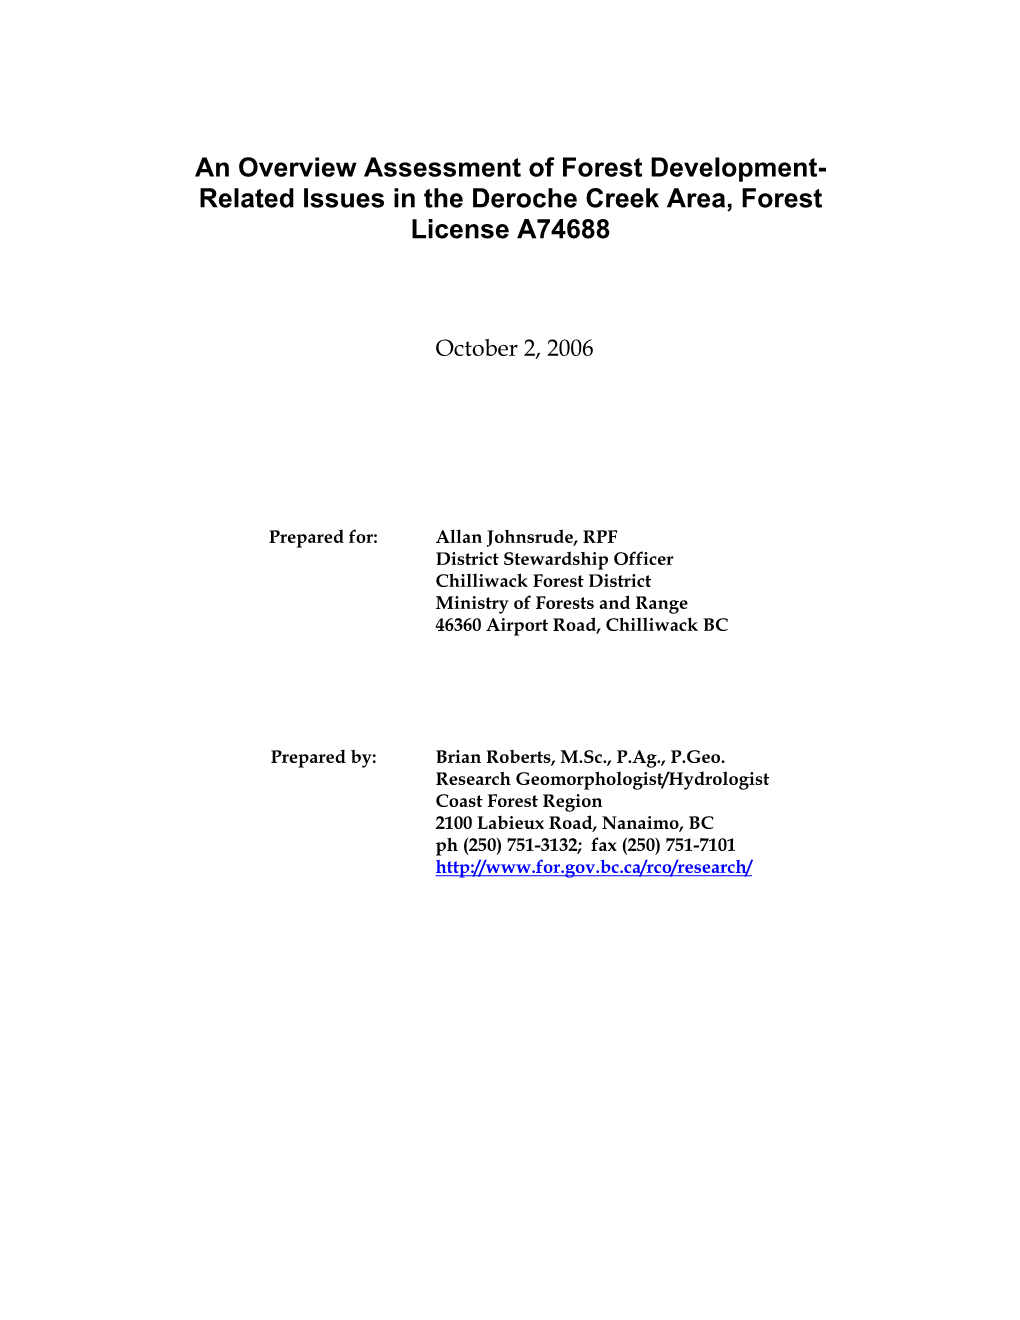 Related Issues in the Deroche Creek Area, Forest License A74688